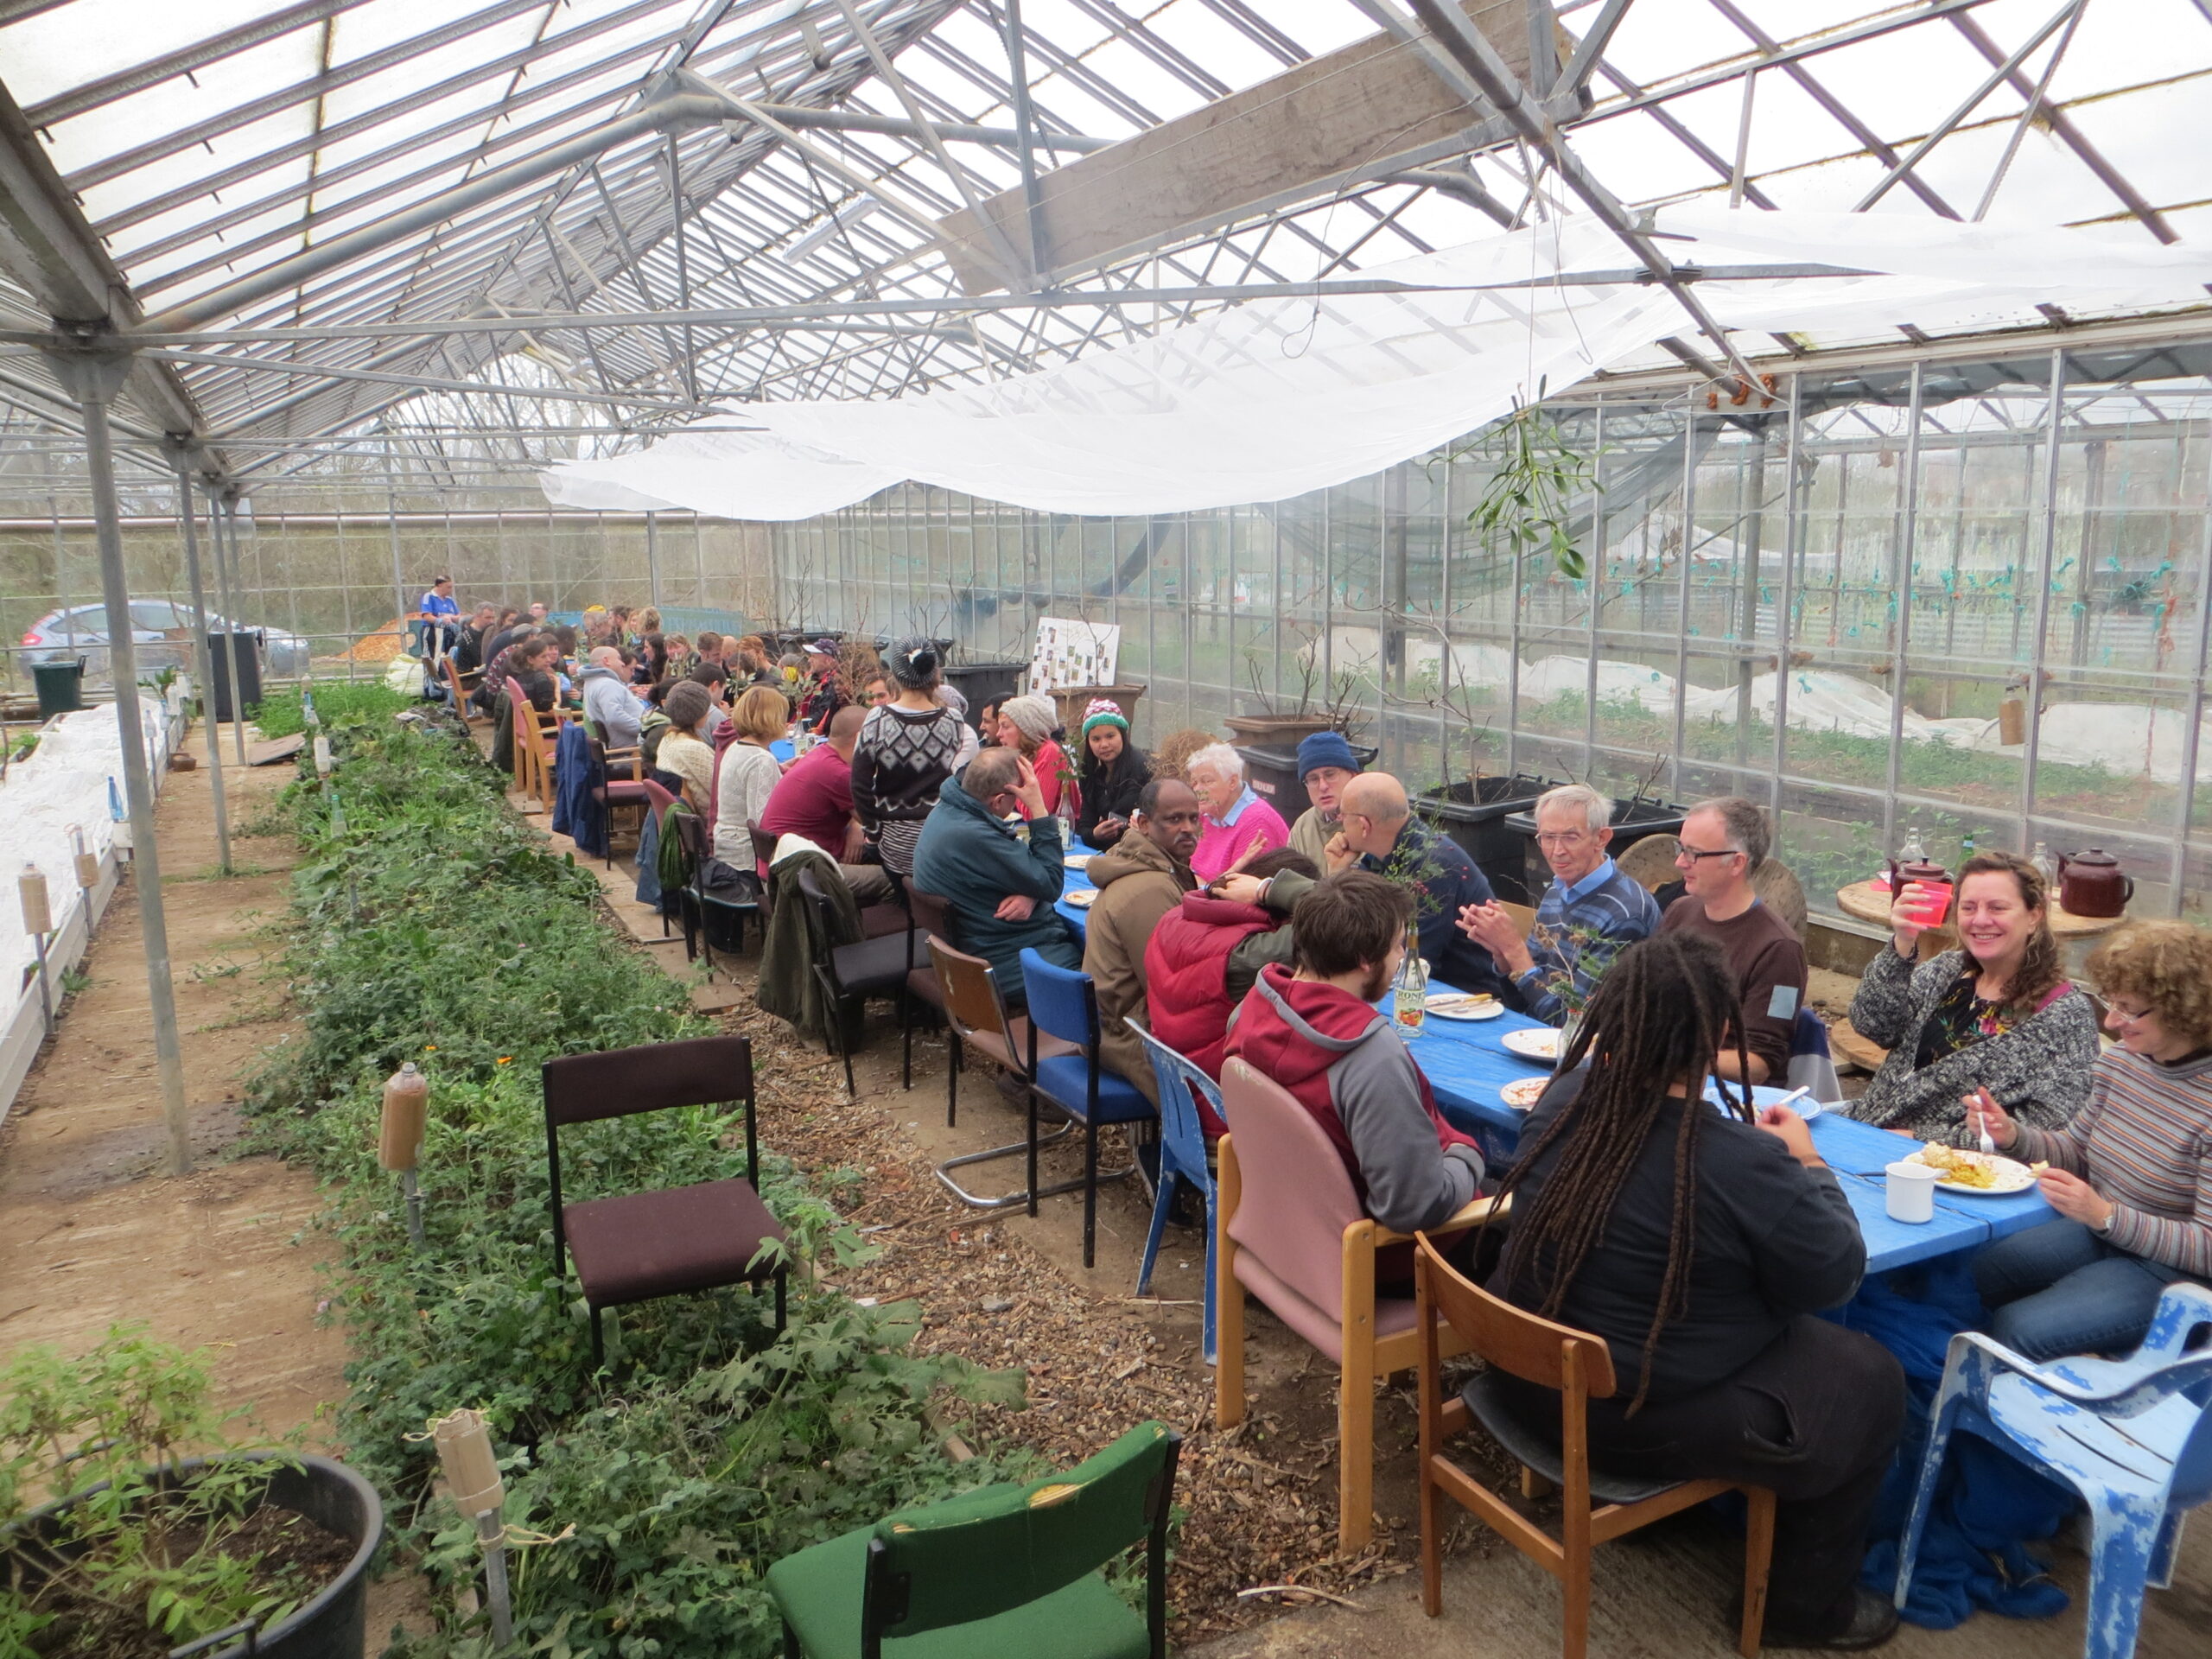 Eating in the glasshouse